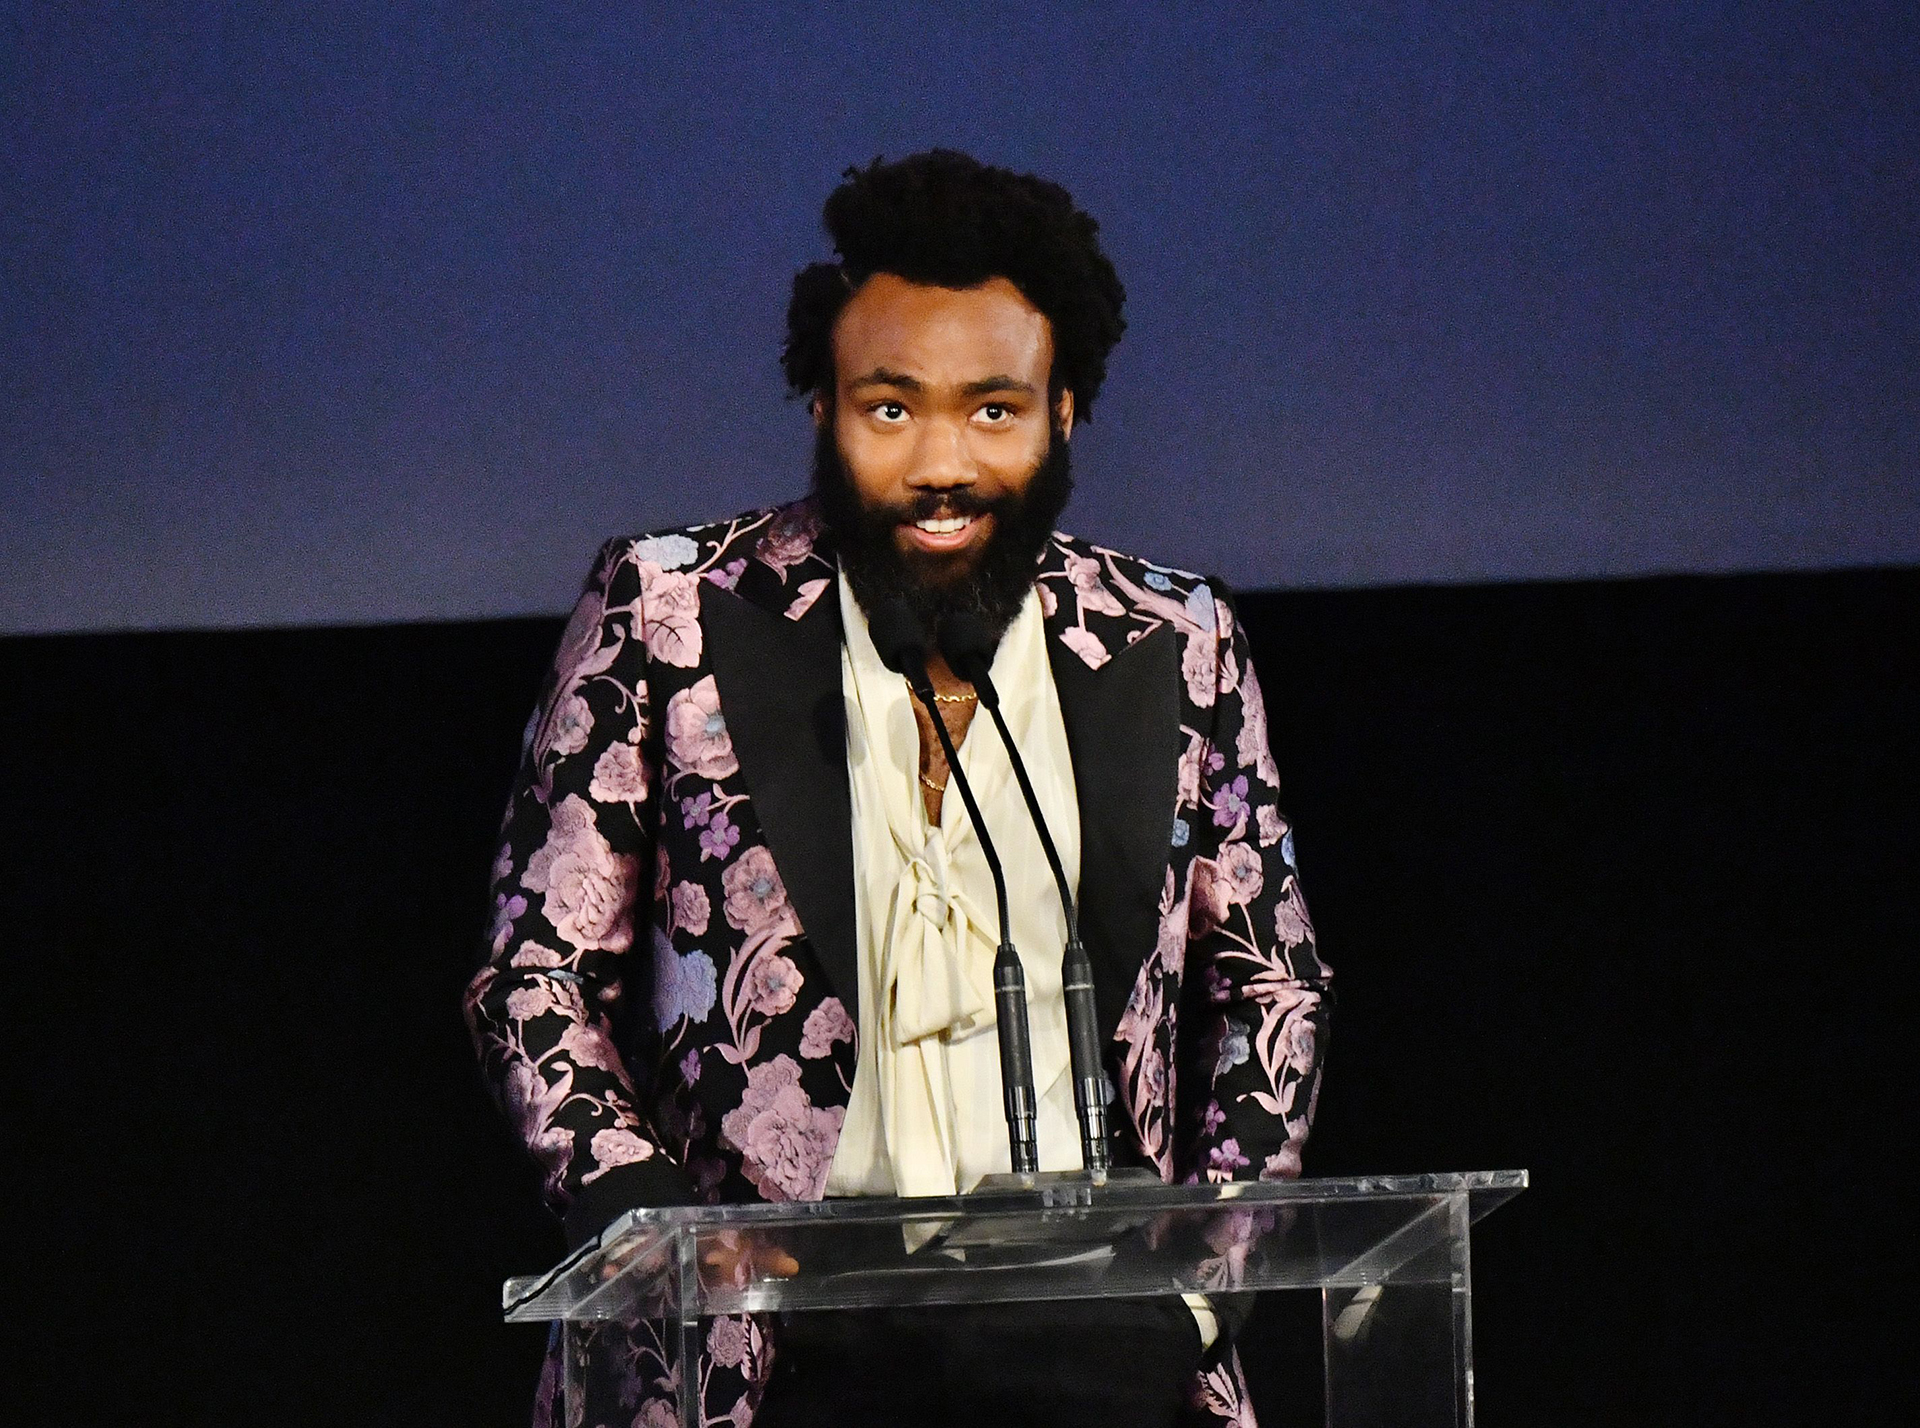 Donald Glover speaks onstage during the 2019 LACMA Art + Film Gala